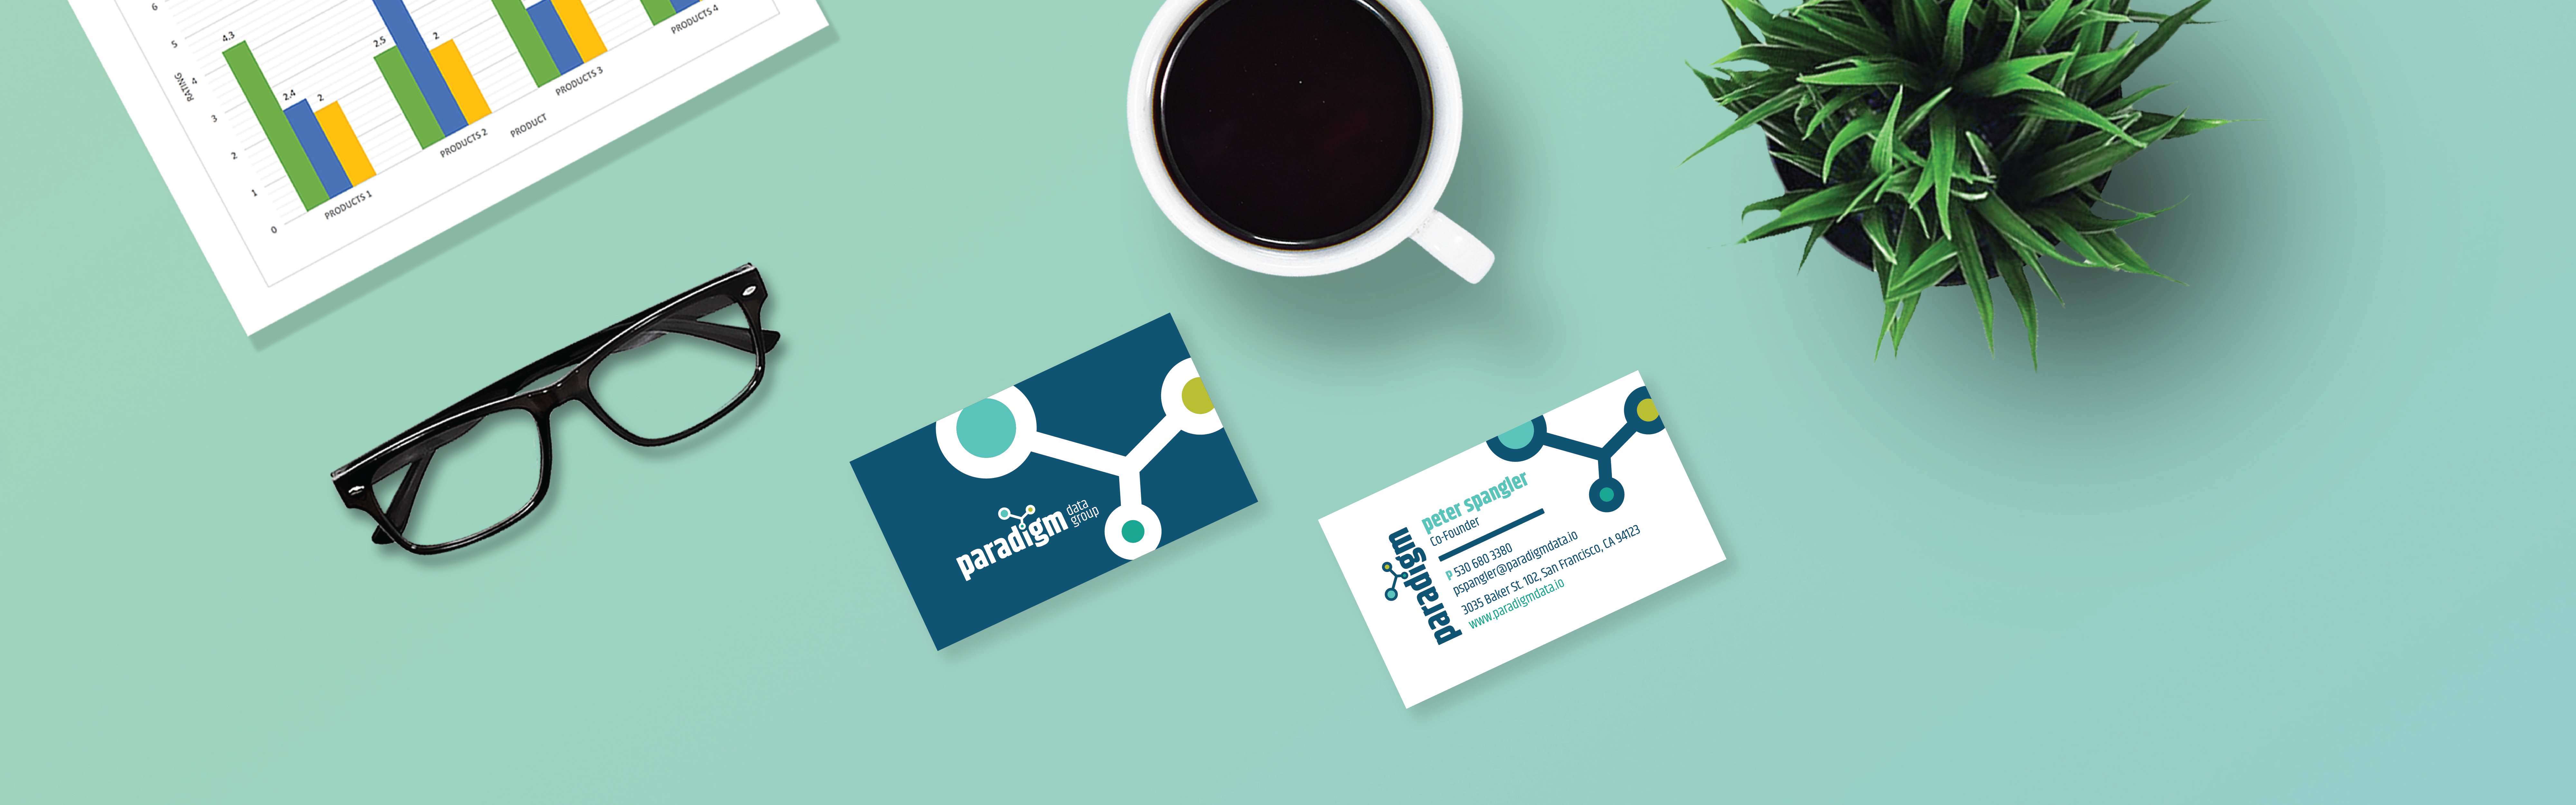 A neatly arranged desk with business cards from Paradigm Data Group, a cup of coffee, eyeglasses, a plant, and printed data charts on a turquoise background.